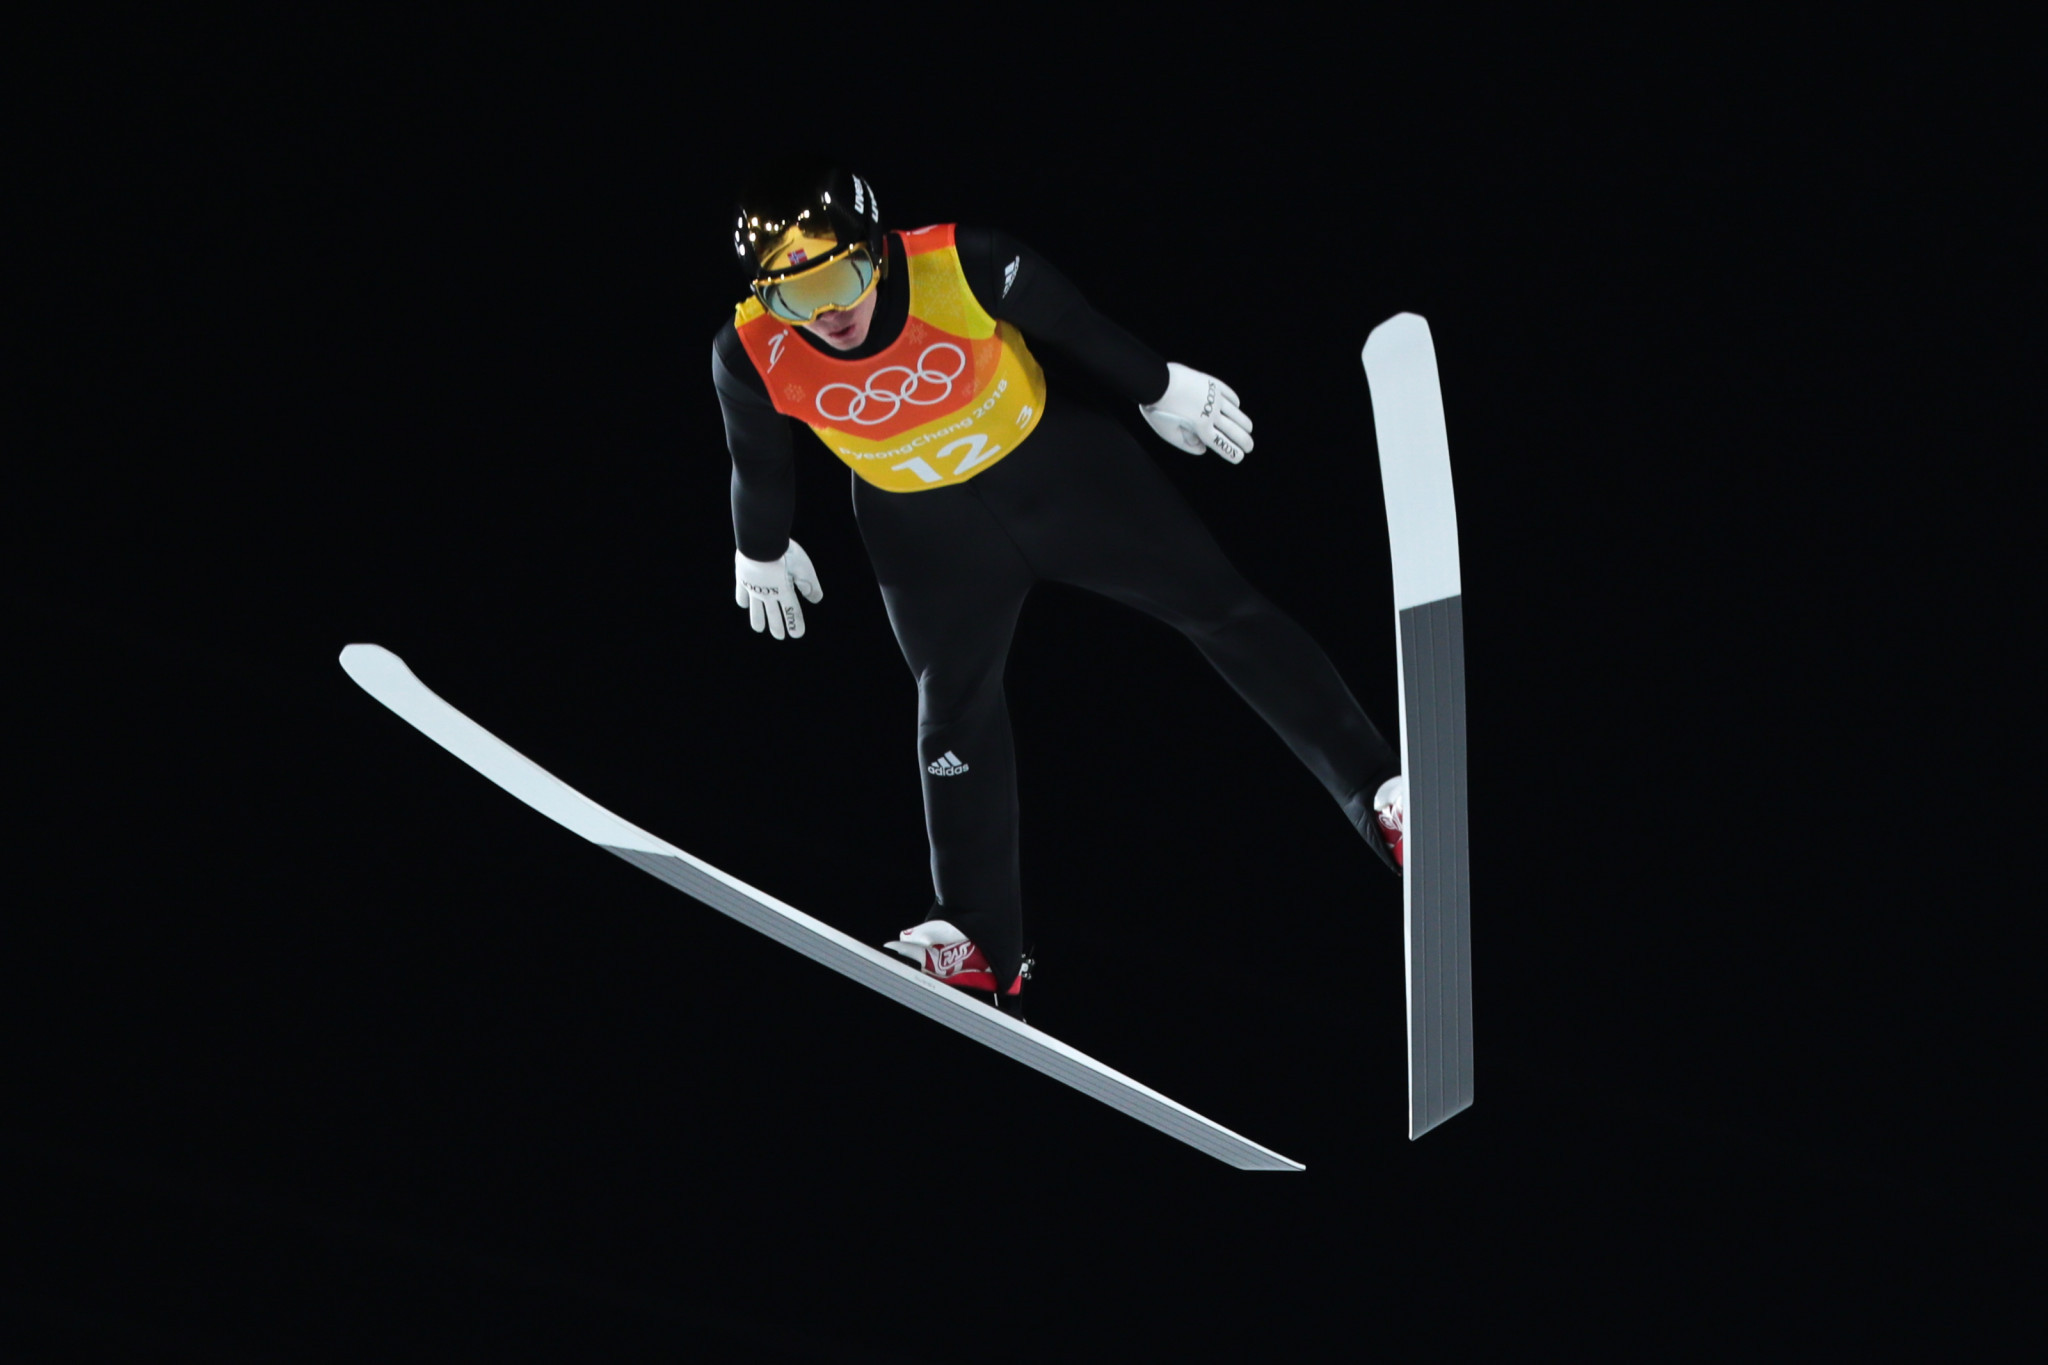 Johann Andre Forfang pictured at last month's Winter Olympic Games ©Getty Images